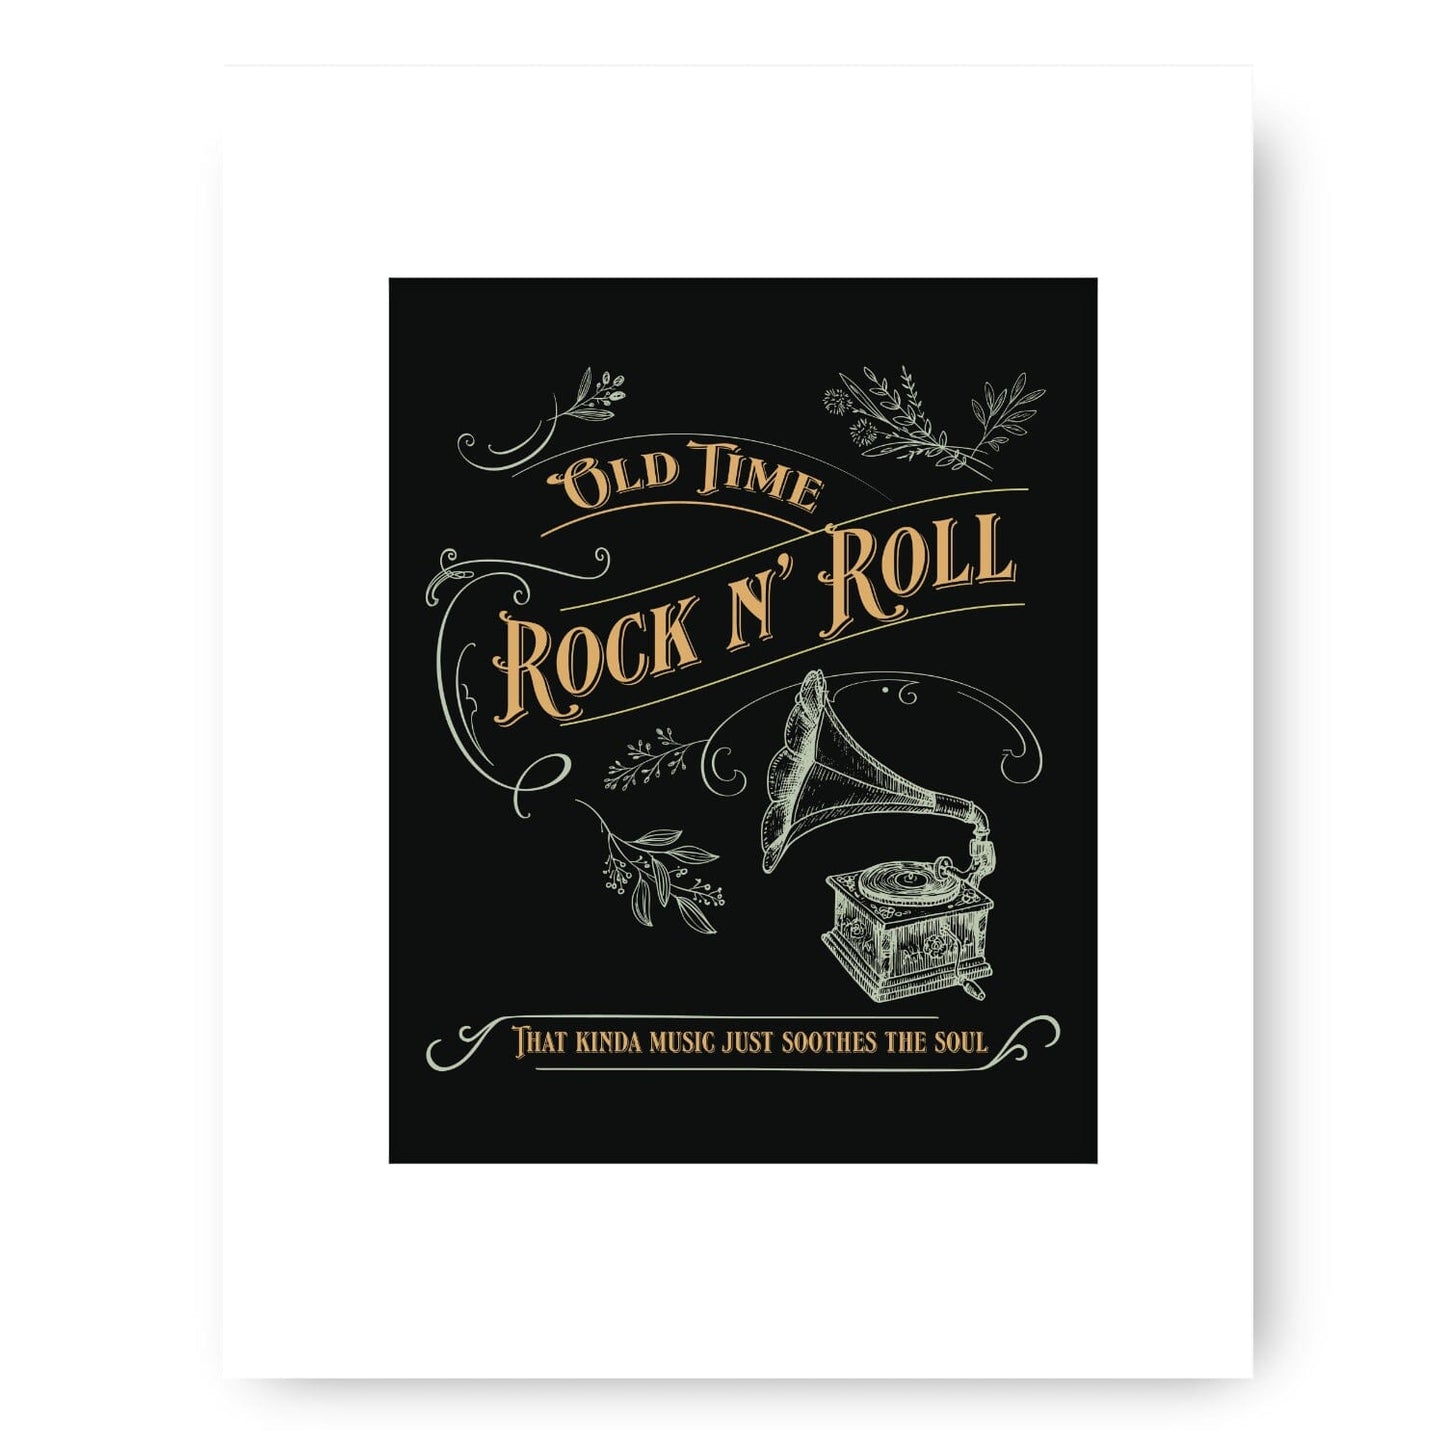 Old Time Rock N' Roll by Bob Seger - Song Lyrics Art Print Song Lyrics Art Song Lyrics Art 8x10 Unframed White Matted Print 